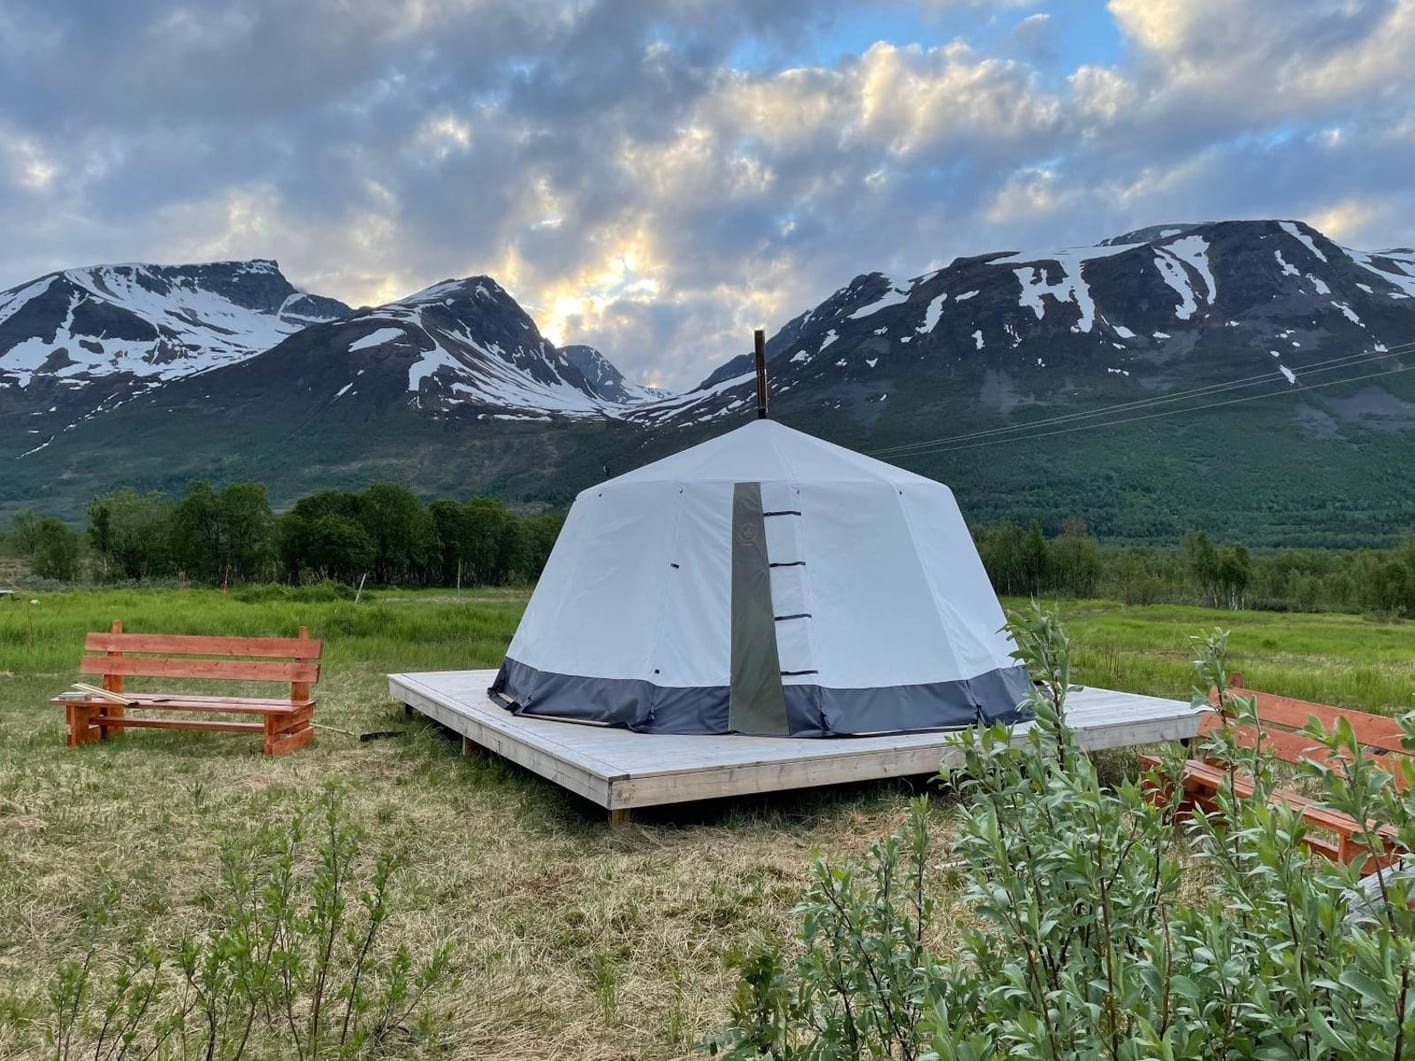 Wild camping Tromso, the best way to enjoy the great outdoors and explore the Arctic wilderness in Tromso